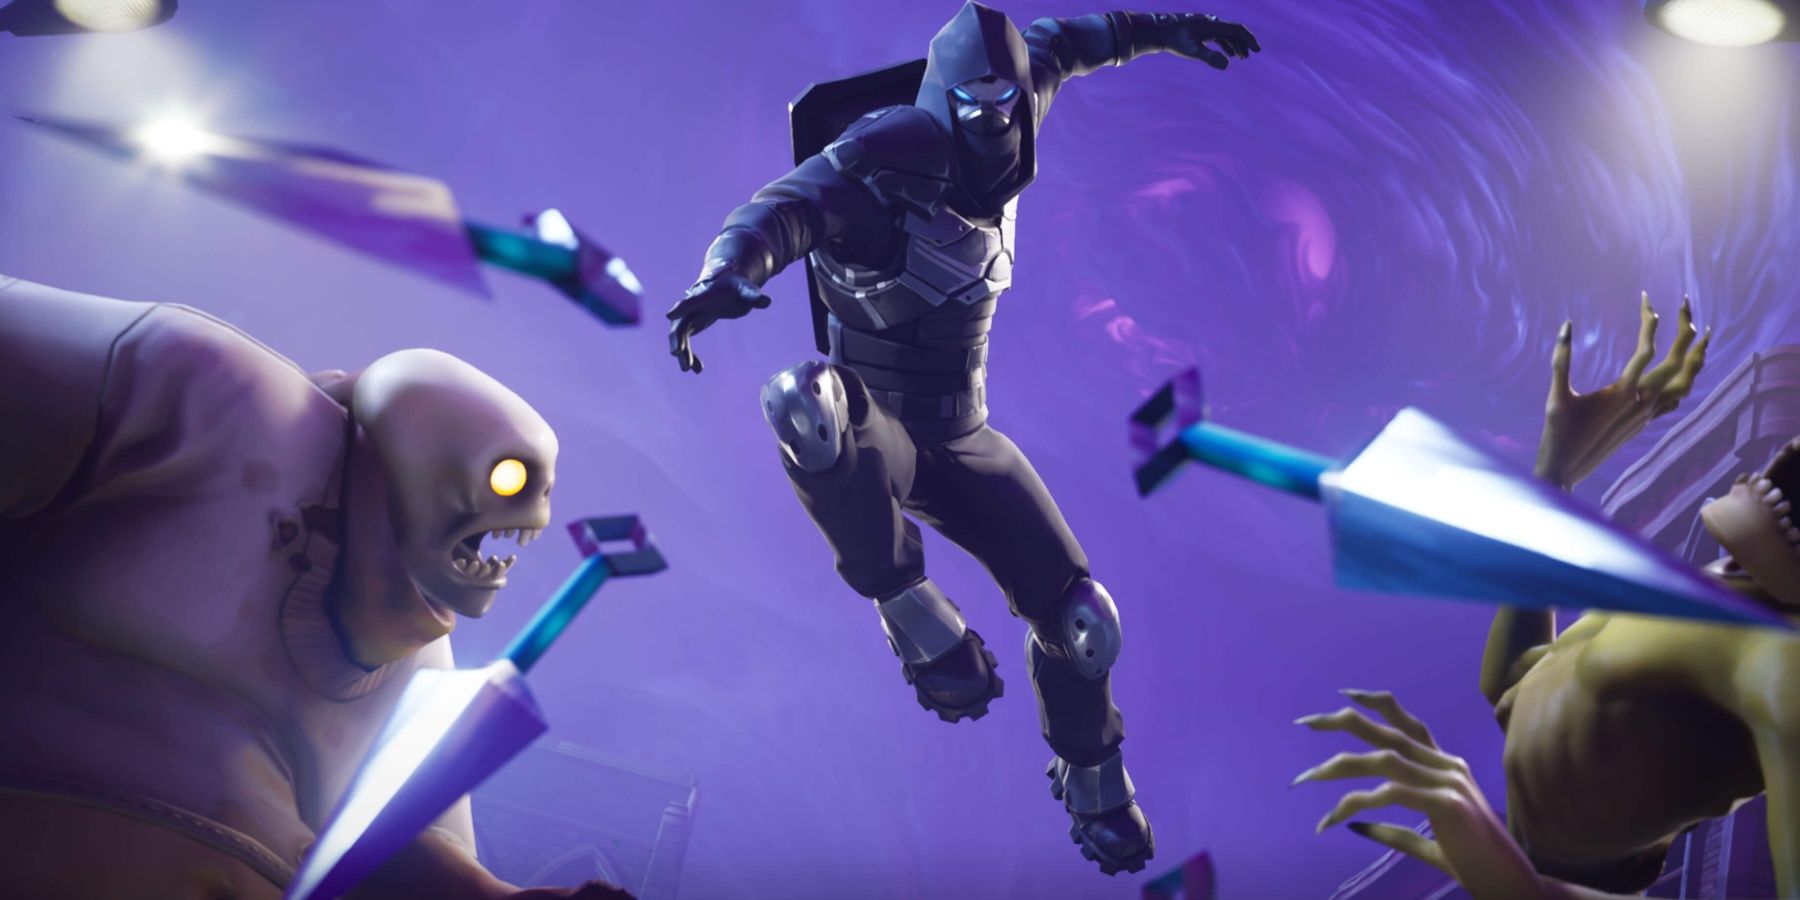 promo image for fortnite stw game mode